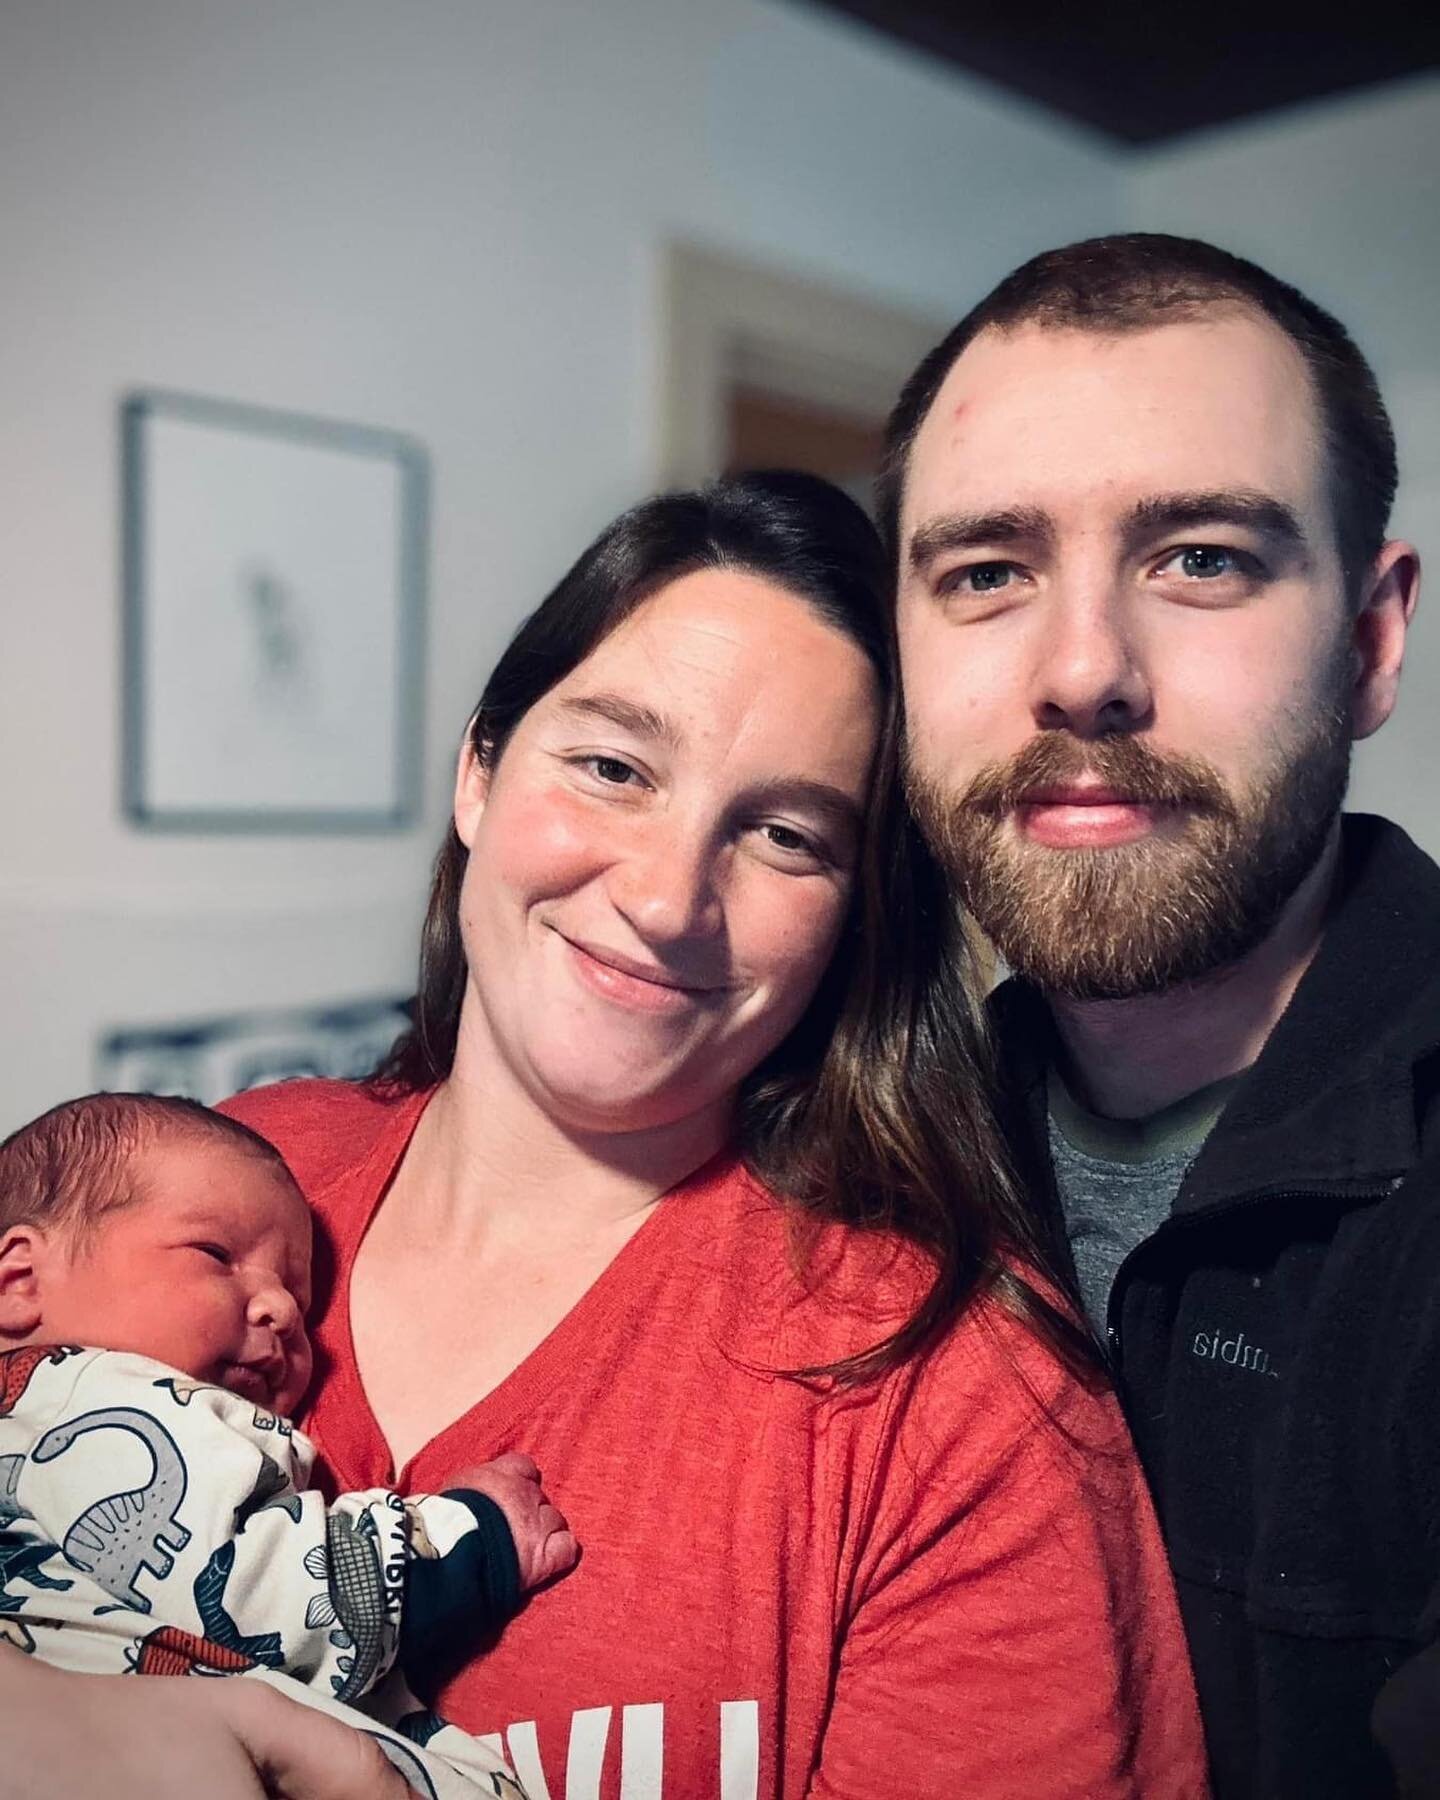 Two weeks ago something very special happened at the little cottage on 804 Smythe St. this wonderful family chose to give birth on their terms. Kate has had the blessing of attending every one of their previous pregnancies at the birth center and thi